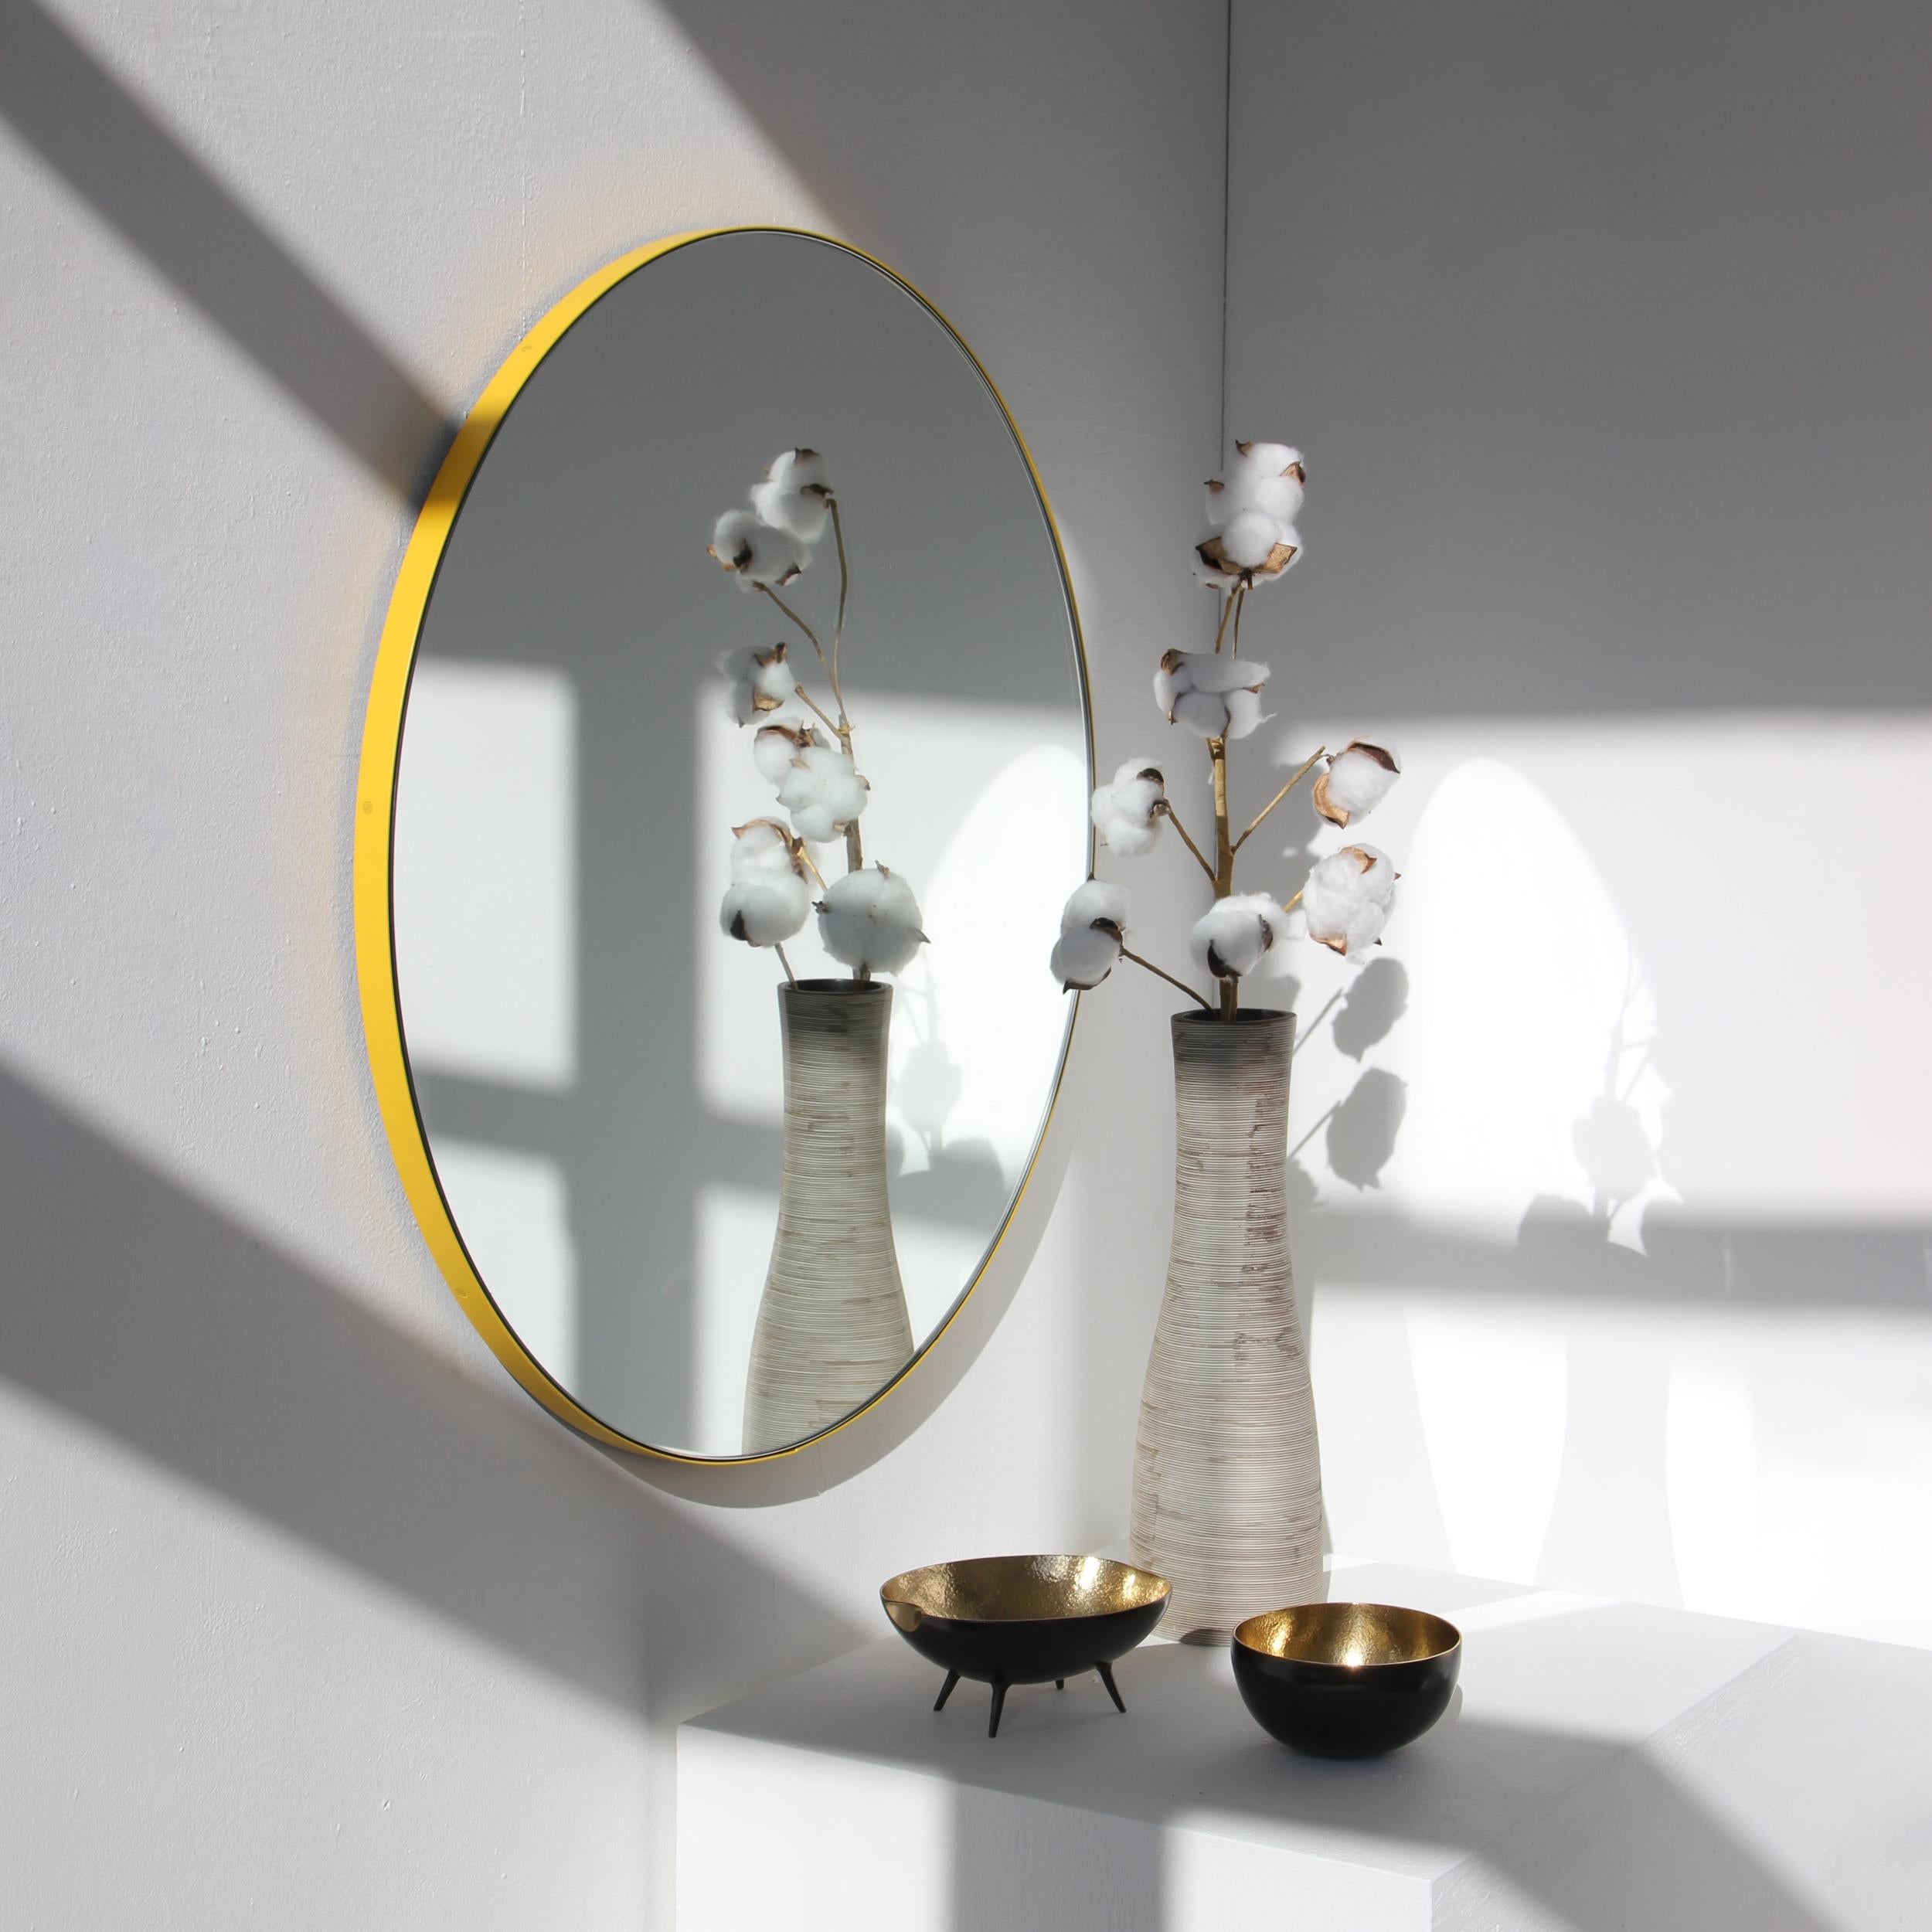 Modern round mirror with a vibrant yellow powder coated aluminium frame. Designed and handcrafted in London, UK.

Medium, large and extra-large mirrors (60, 80 and 100cm) are fitted with an ingenious French cleat (split batten) system so they may